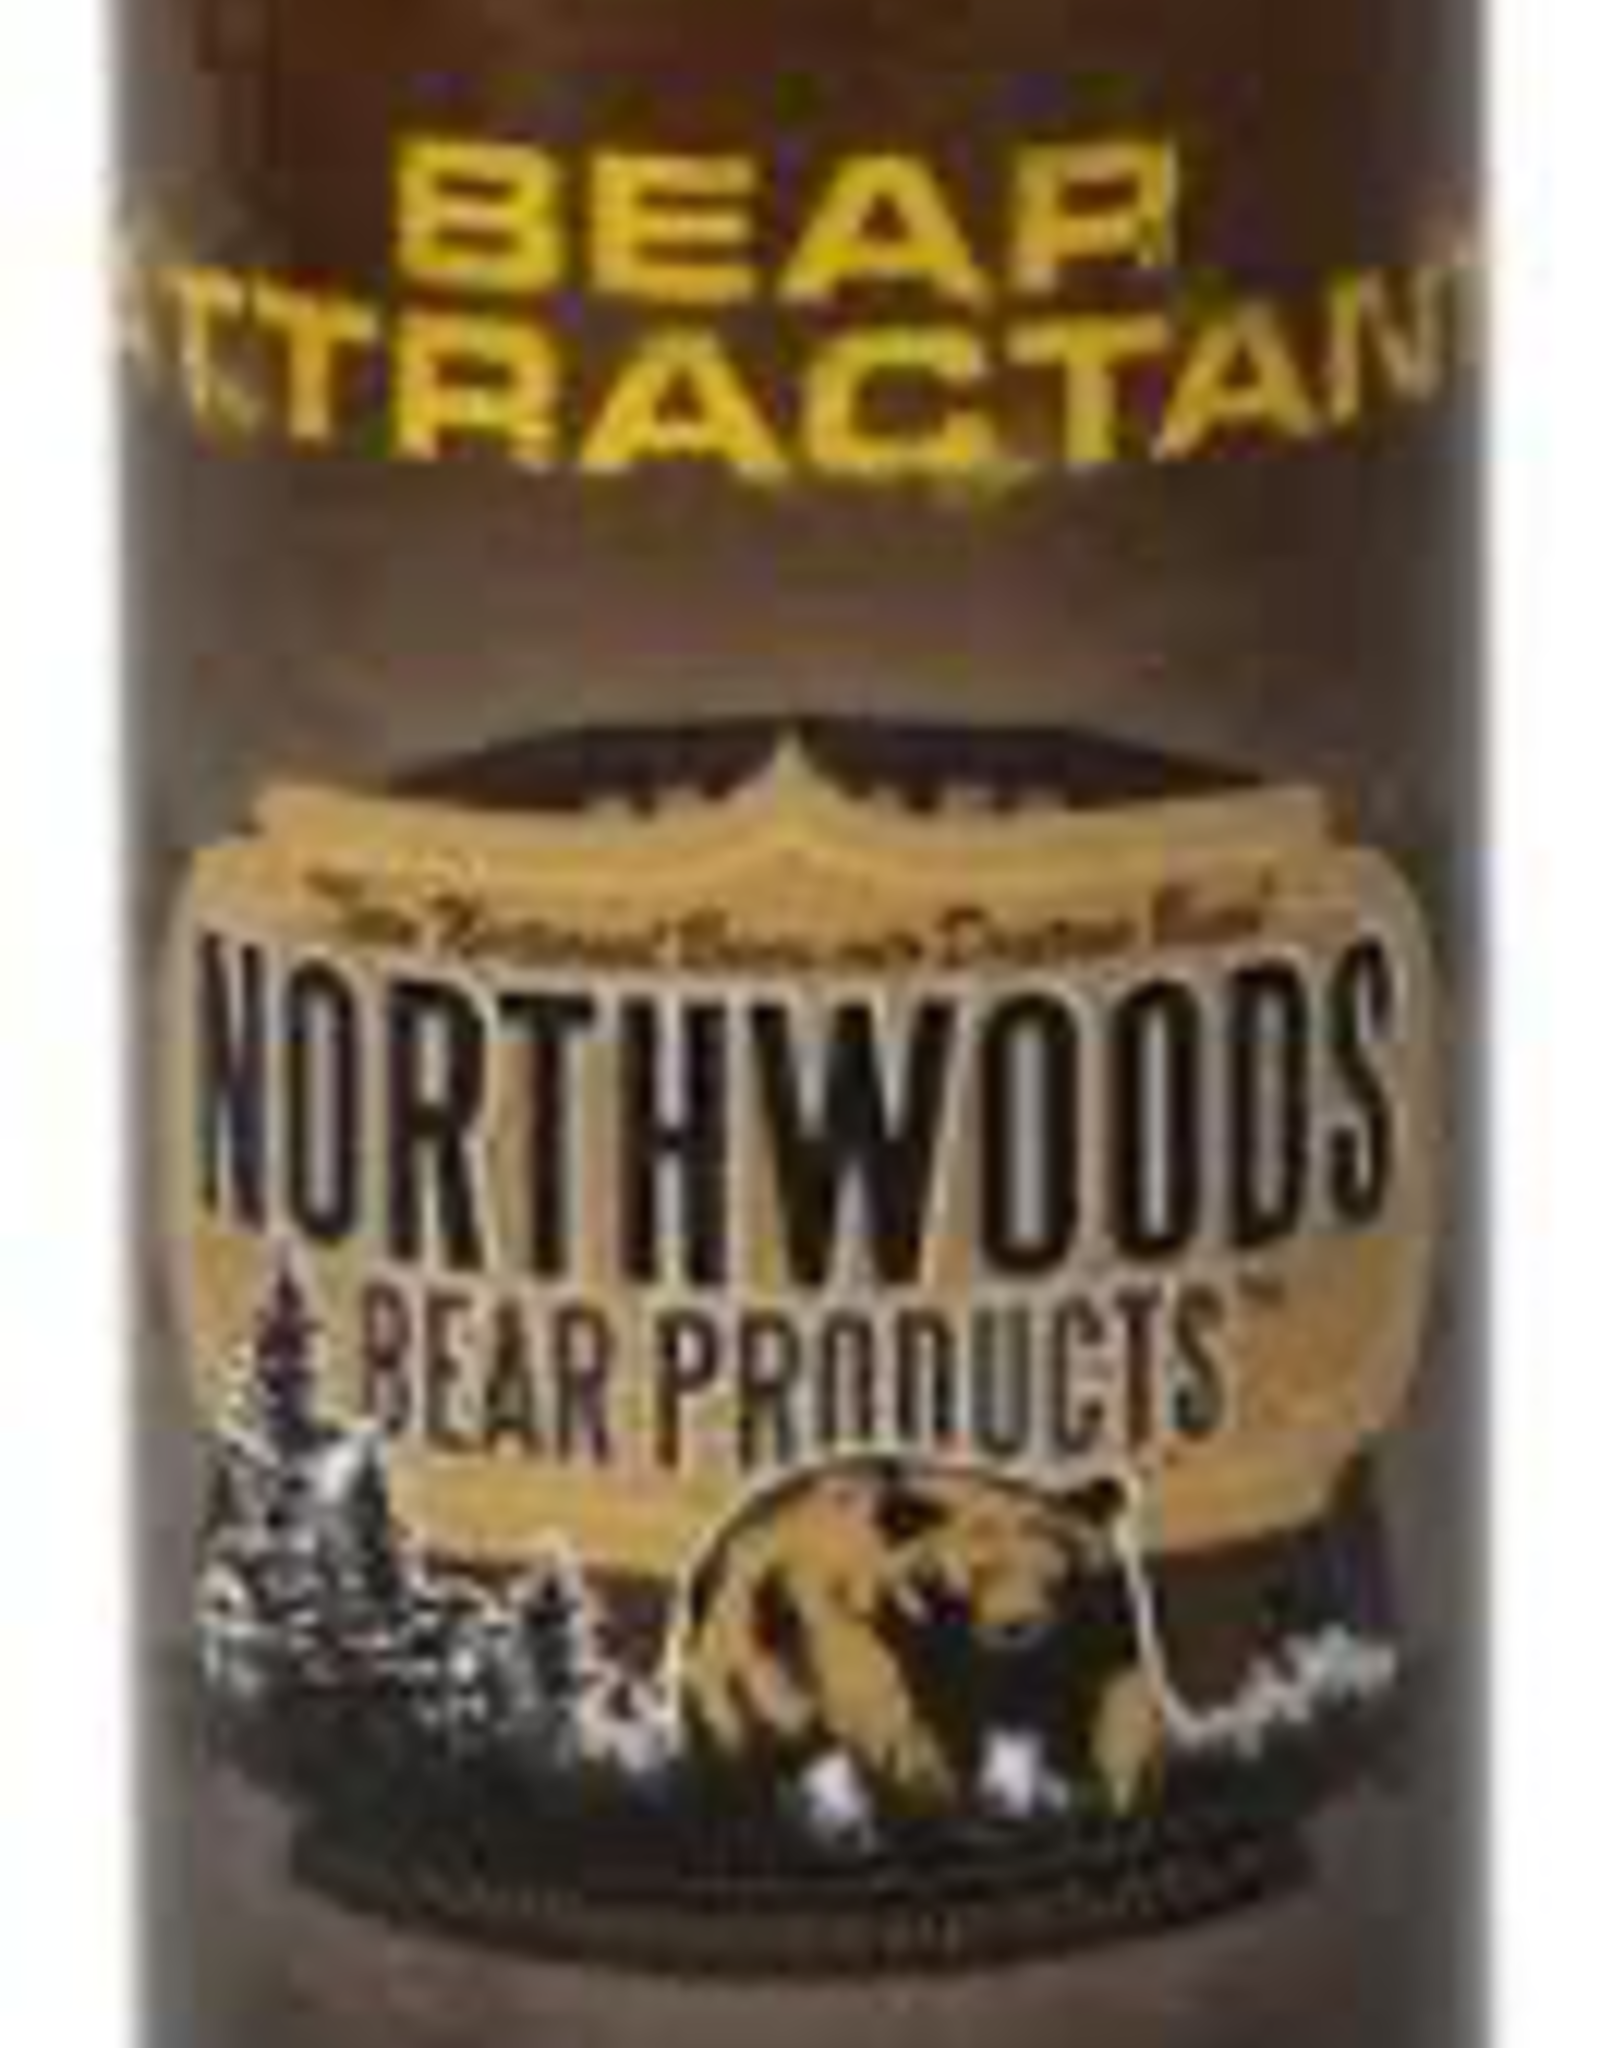 North Woods Bear Products Gold Rush 8oz Bottle